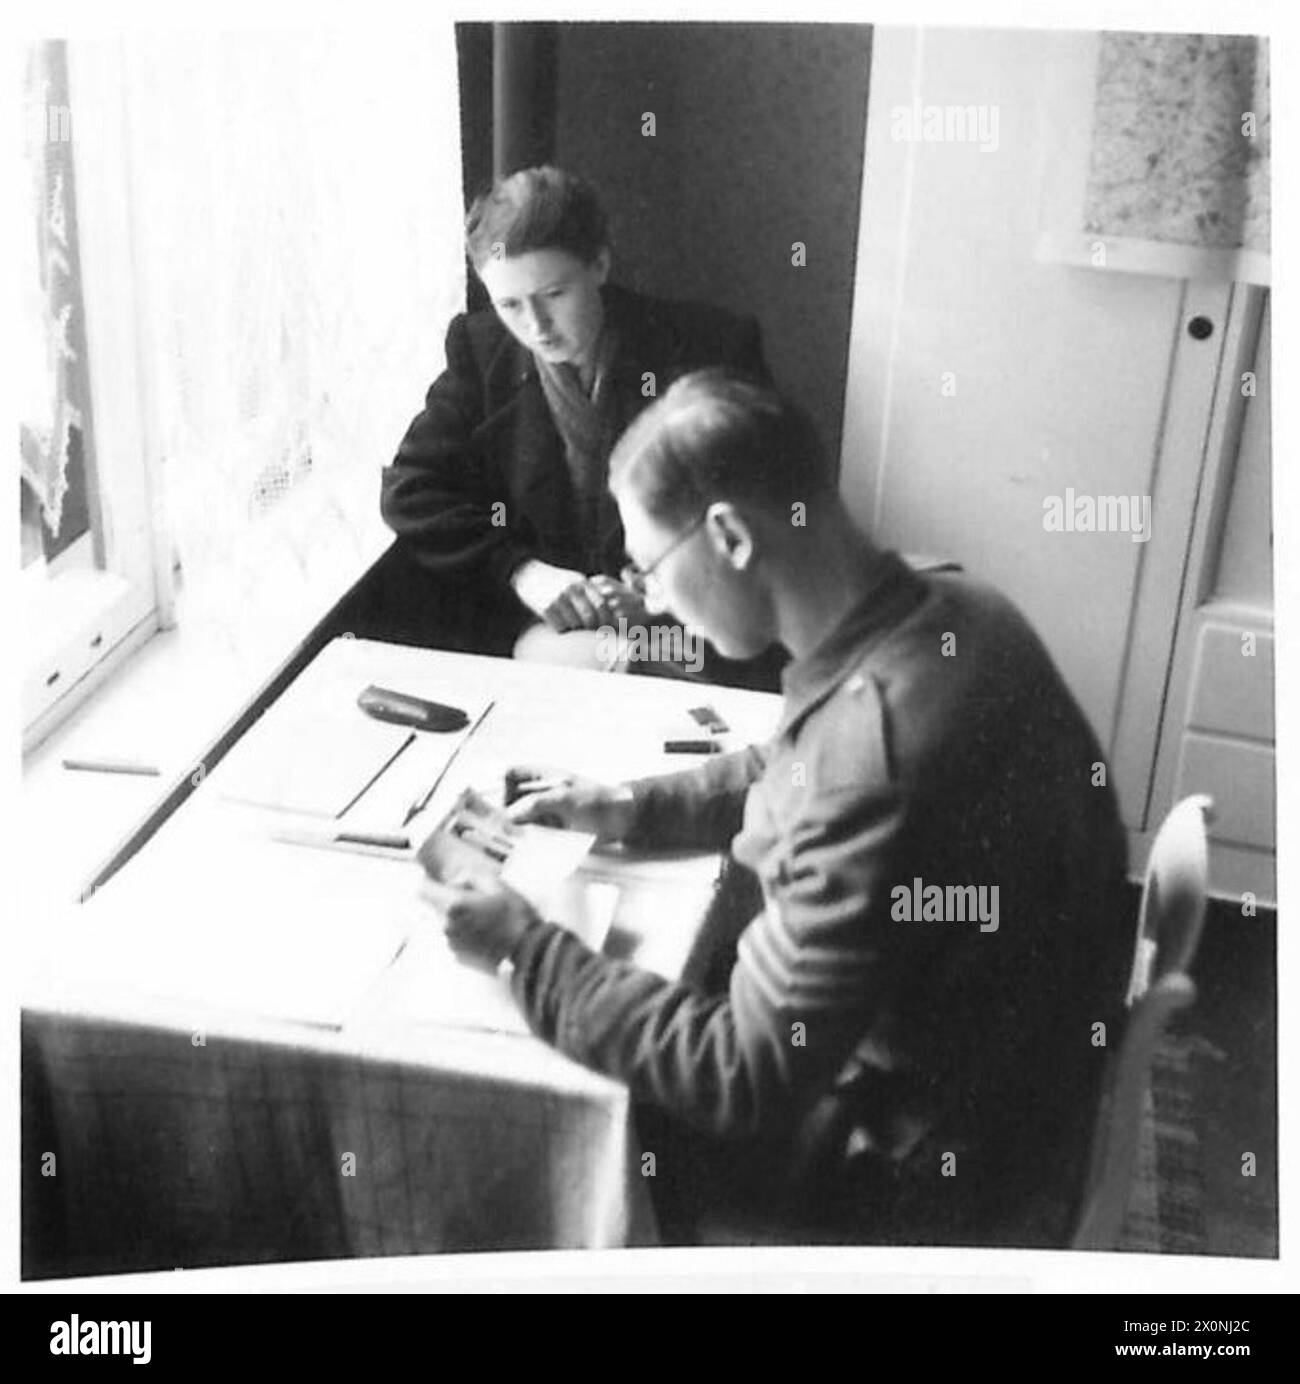 FIELD SECURITY INTELLIGENCE MEN AT WORK - Ursula Pries, who was also a typist at Lubeck Gestapo office, being interrogated by an F.S.I. sergeant. Photographic negative , British Army, 21st Army Group Stock Photo